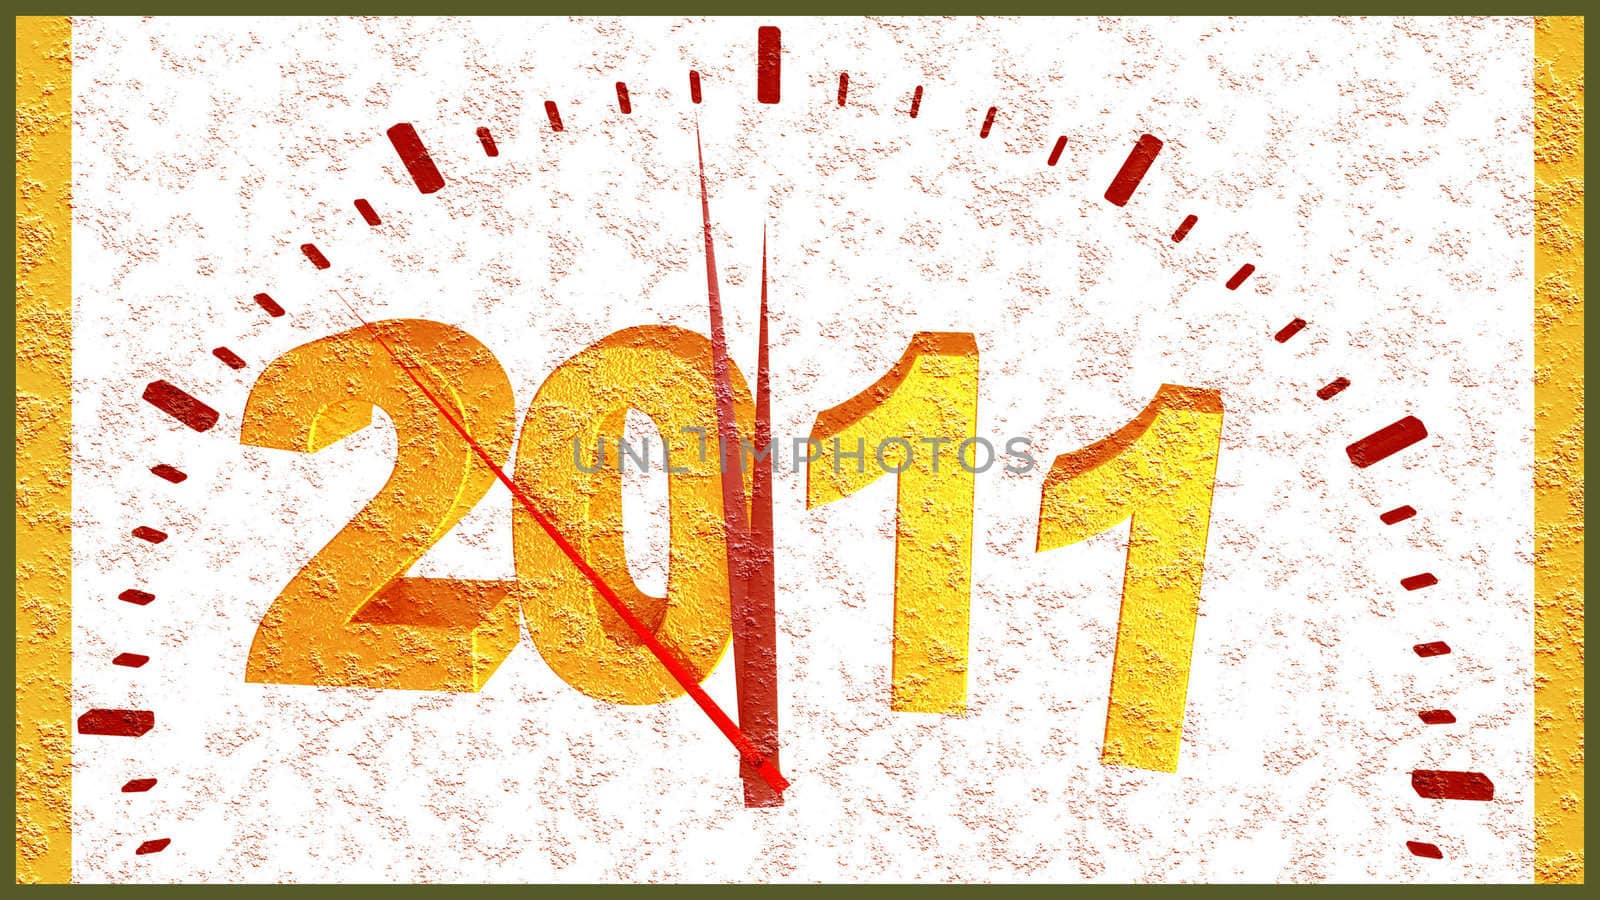 Clock -showing five minutes to twelve, and 2011 New Year! by Baltus